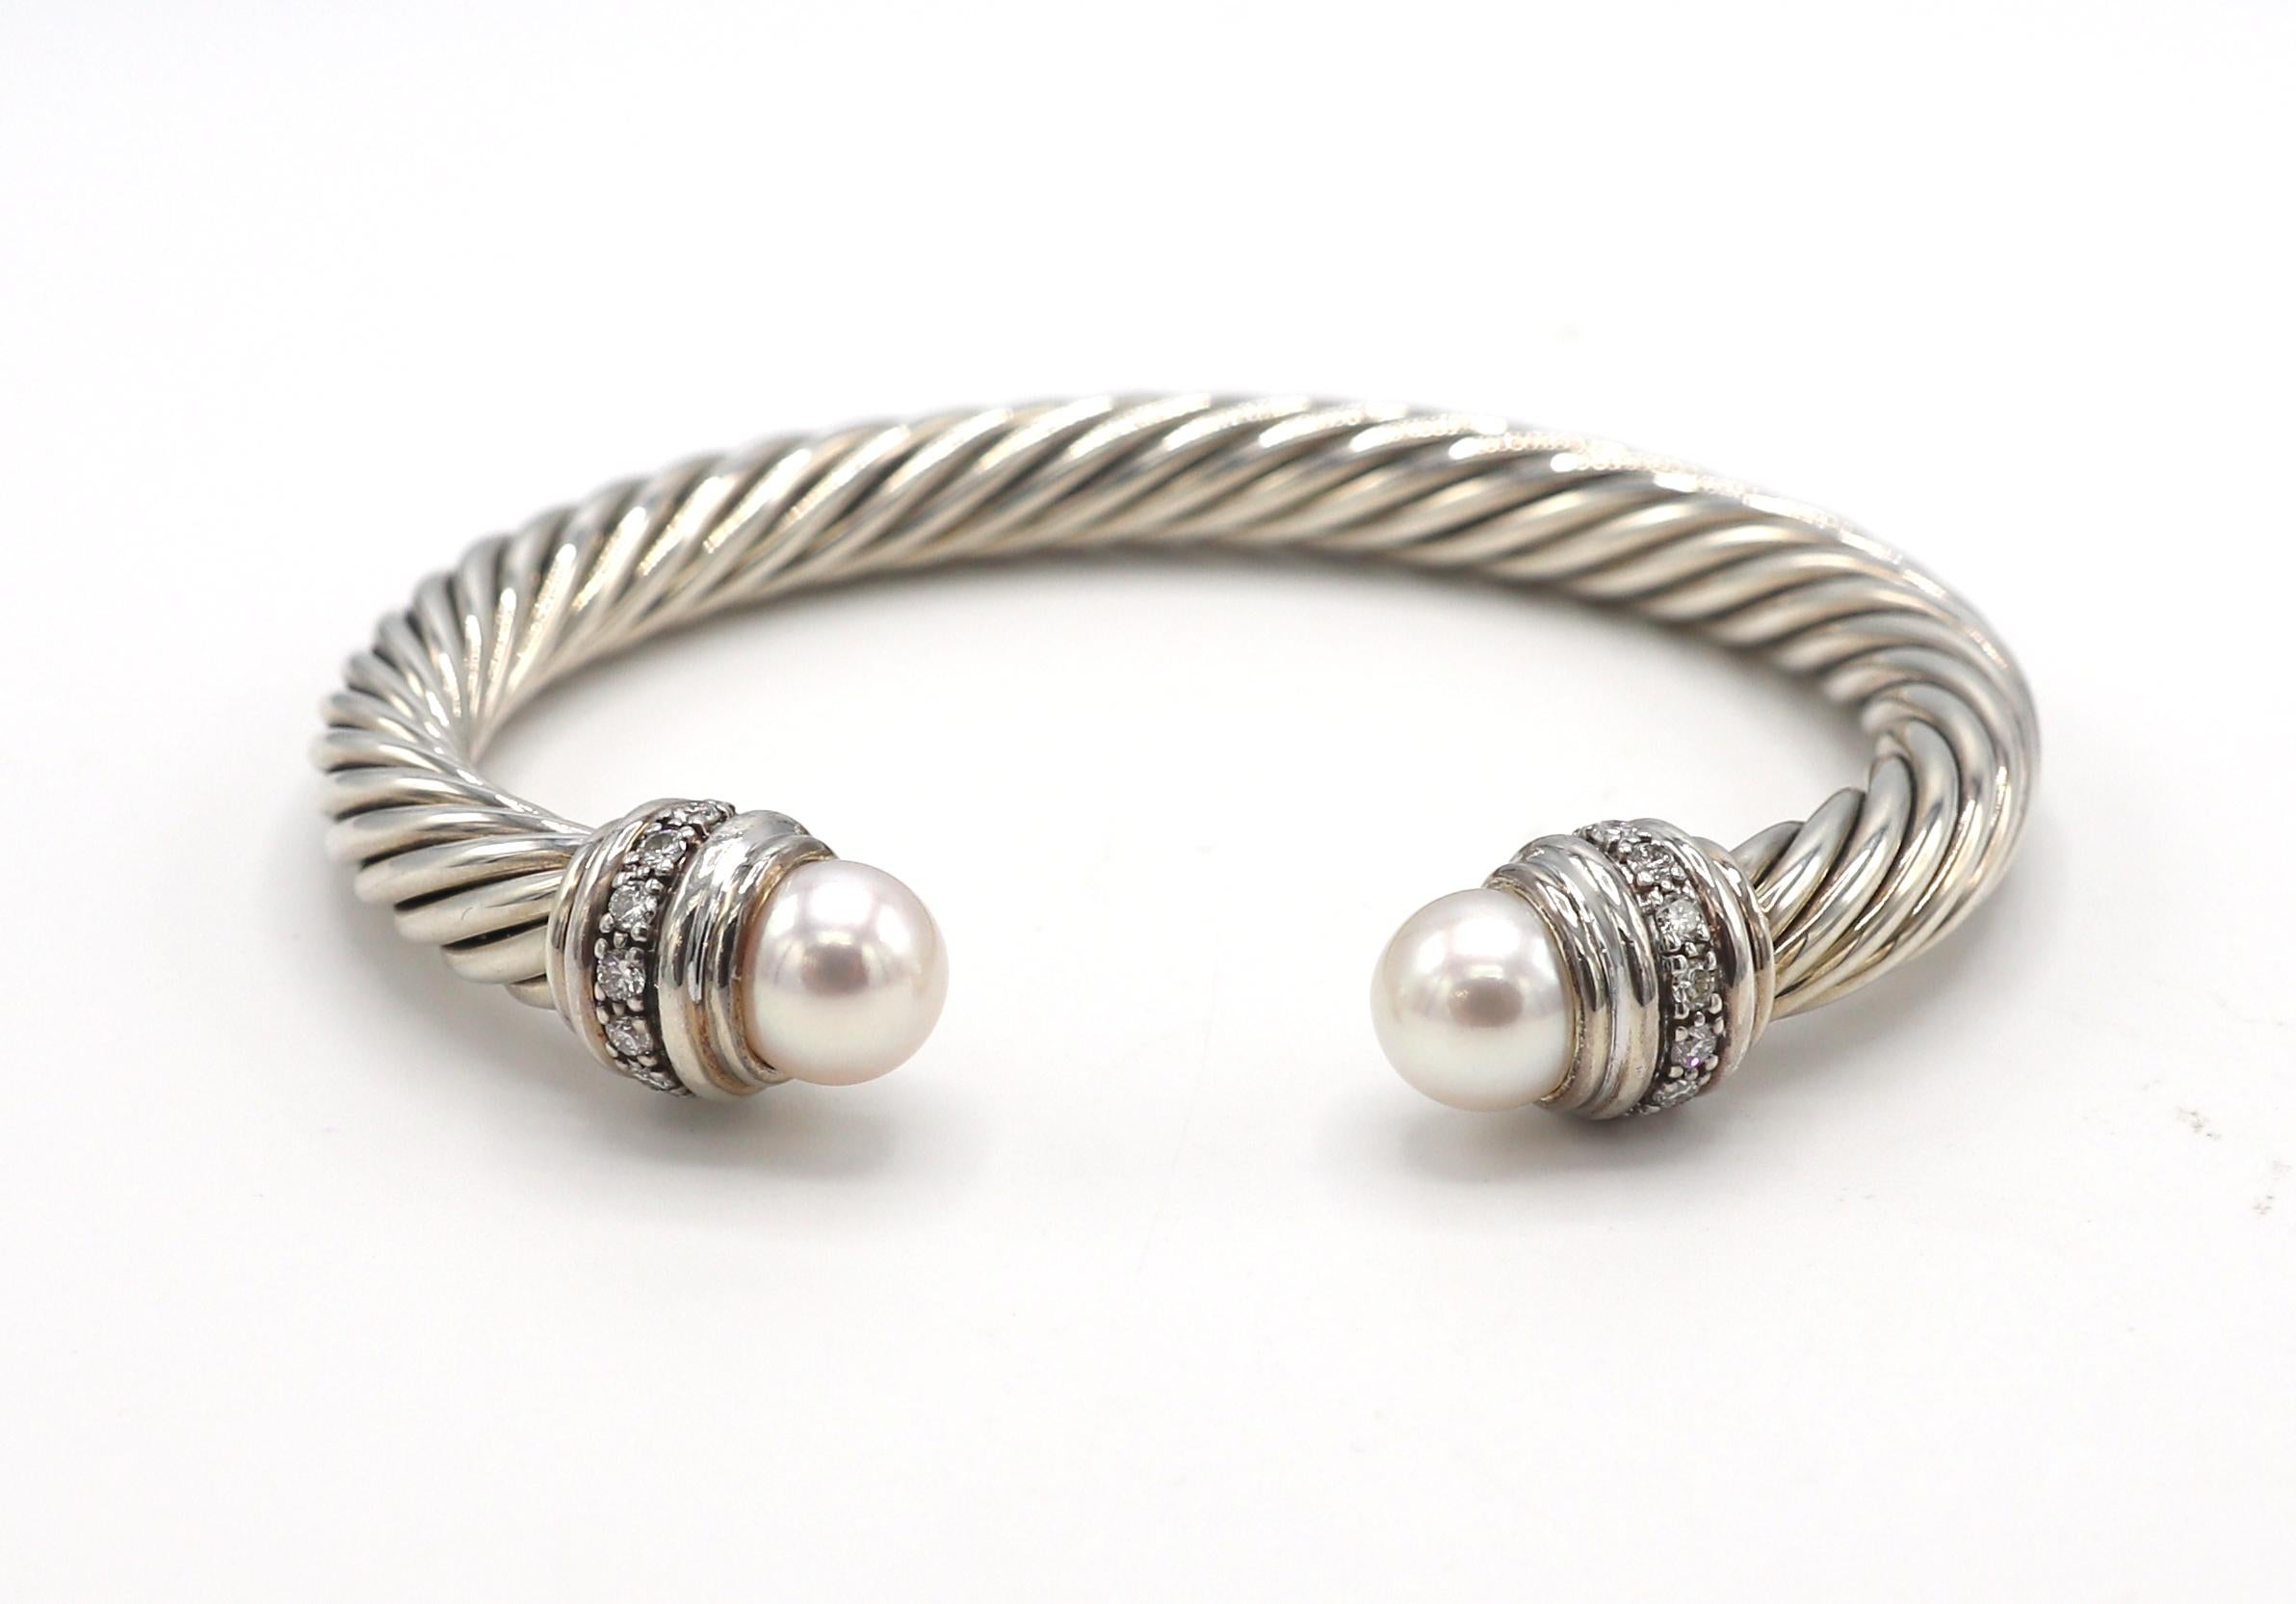 David Yurman Cable Sterling Silver Pearl & Natural Diamond Bangle Cuff Bracelet 
Metal: Stelring silver
Weight: 44 grams
Width: 7mm
Diamonds: Approx. .40 CTW G VS round natural diamonds
Length: Fits approx. 7